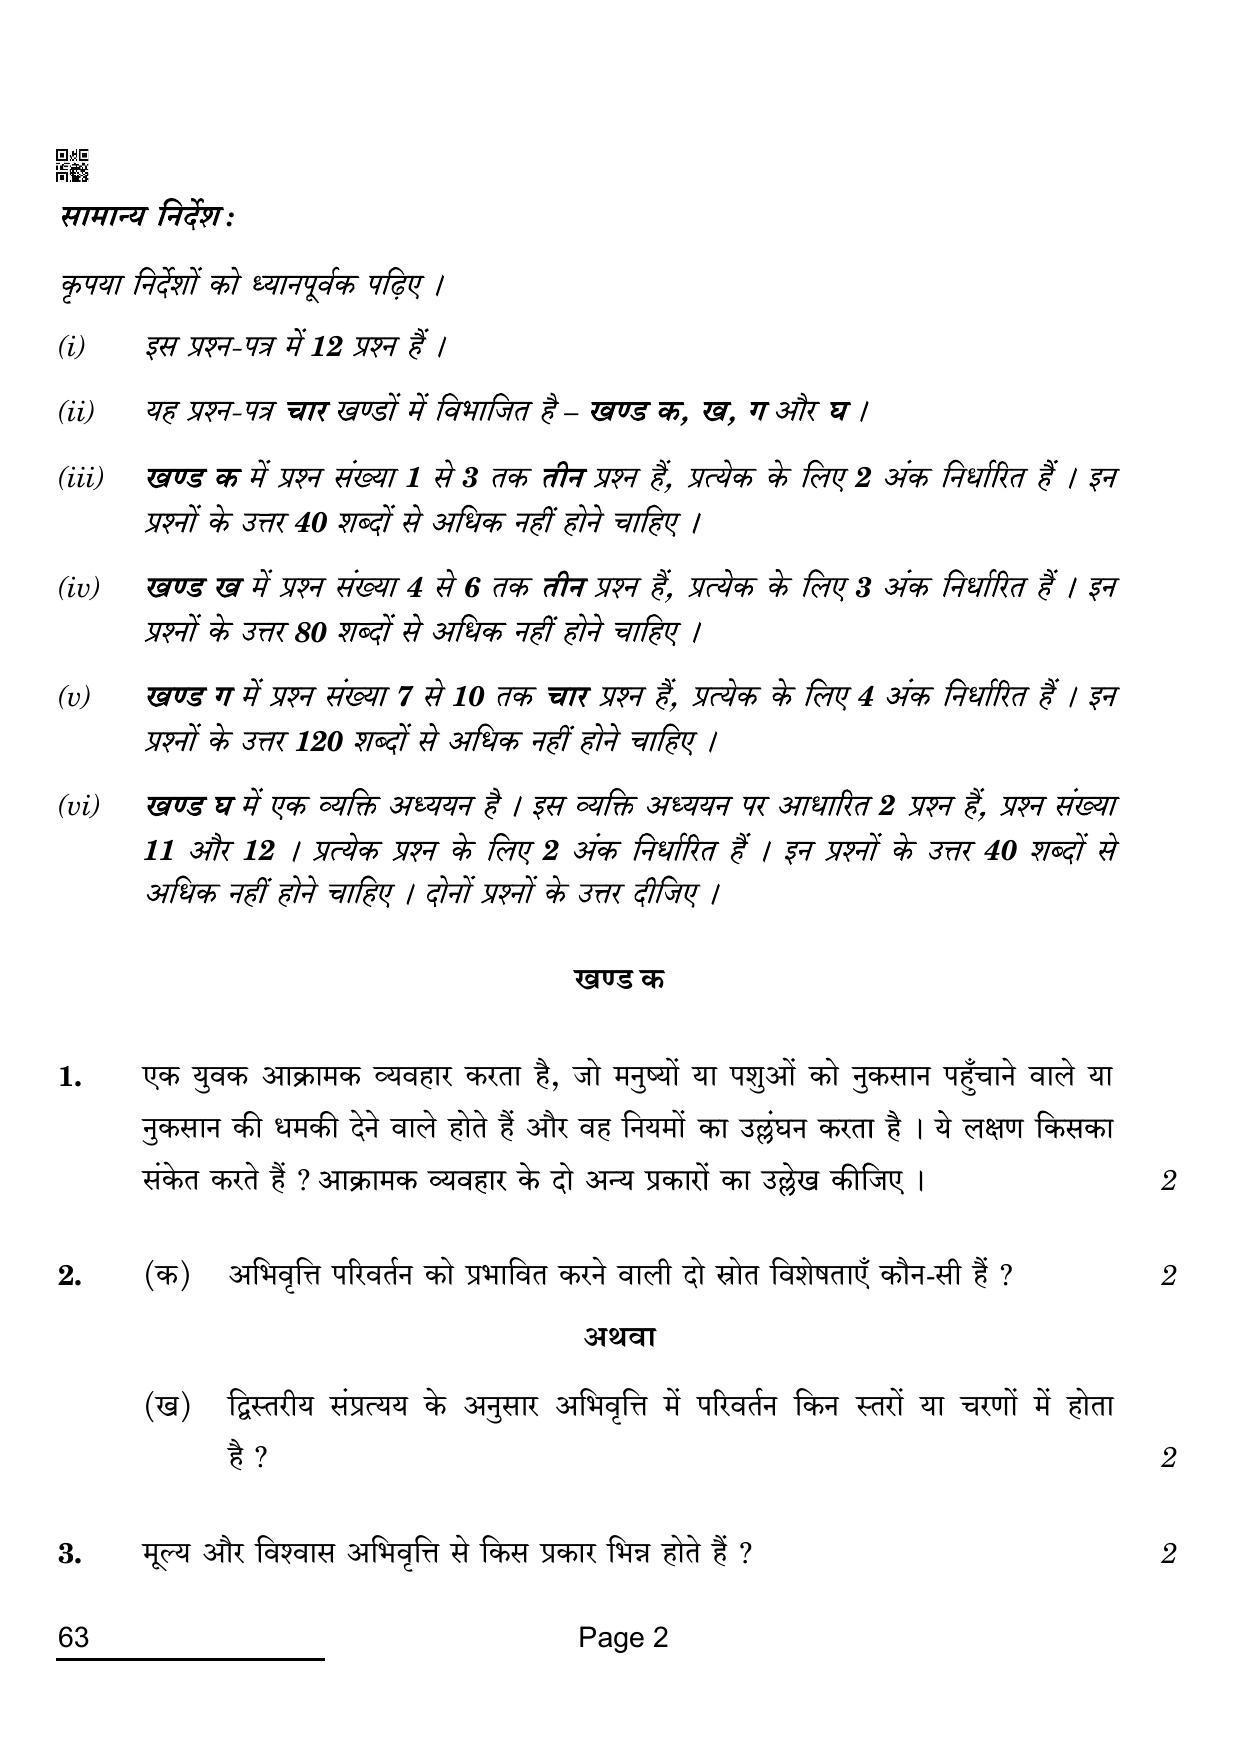 CBSE Class 12 63 Psychology 2022 Compartment Question Paper - Page 2